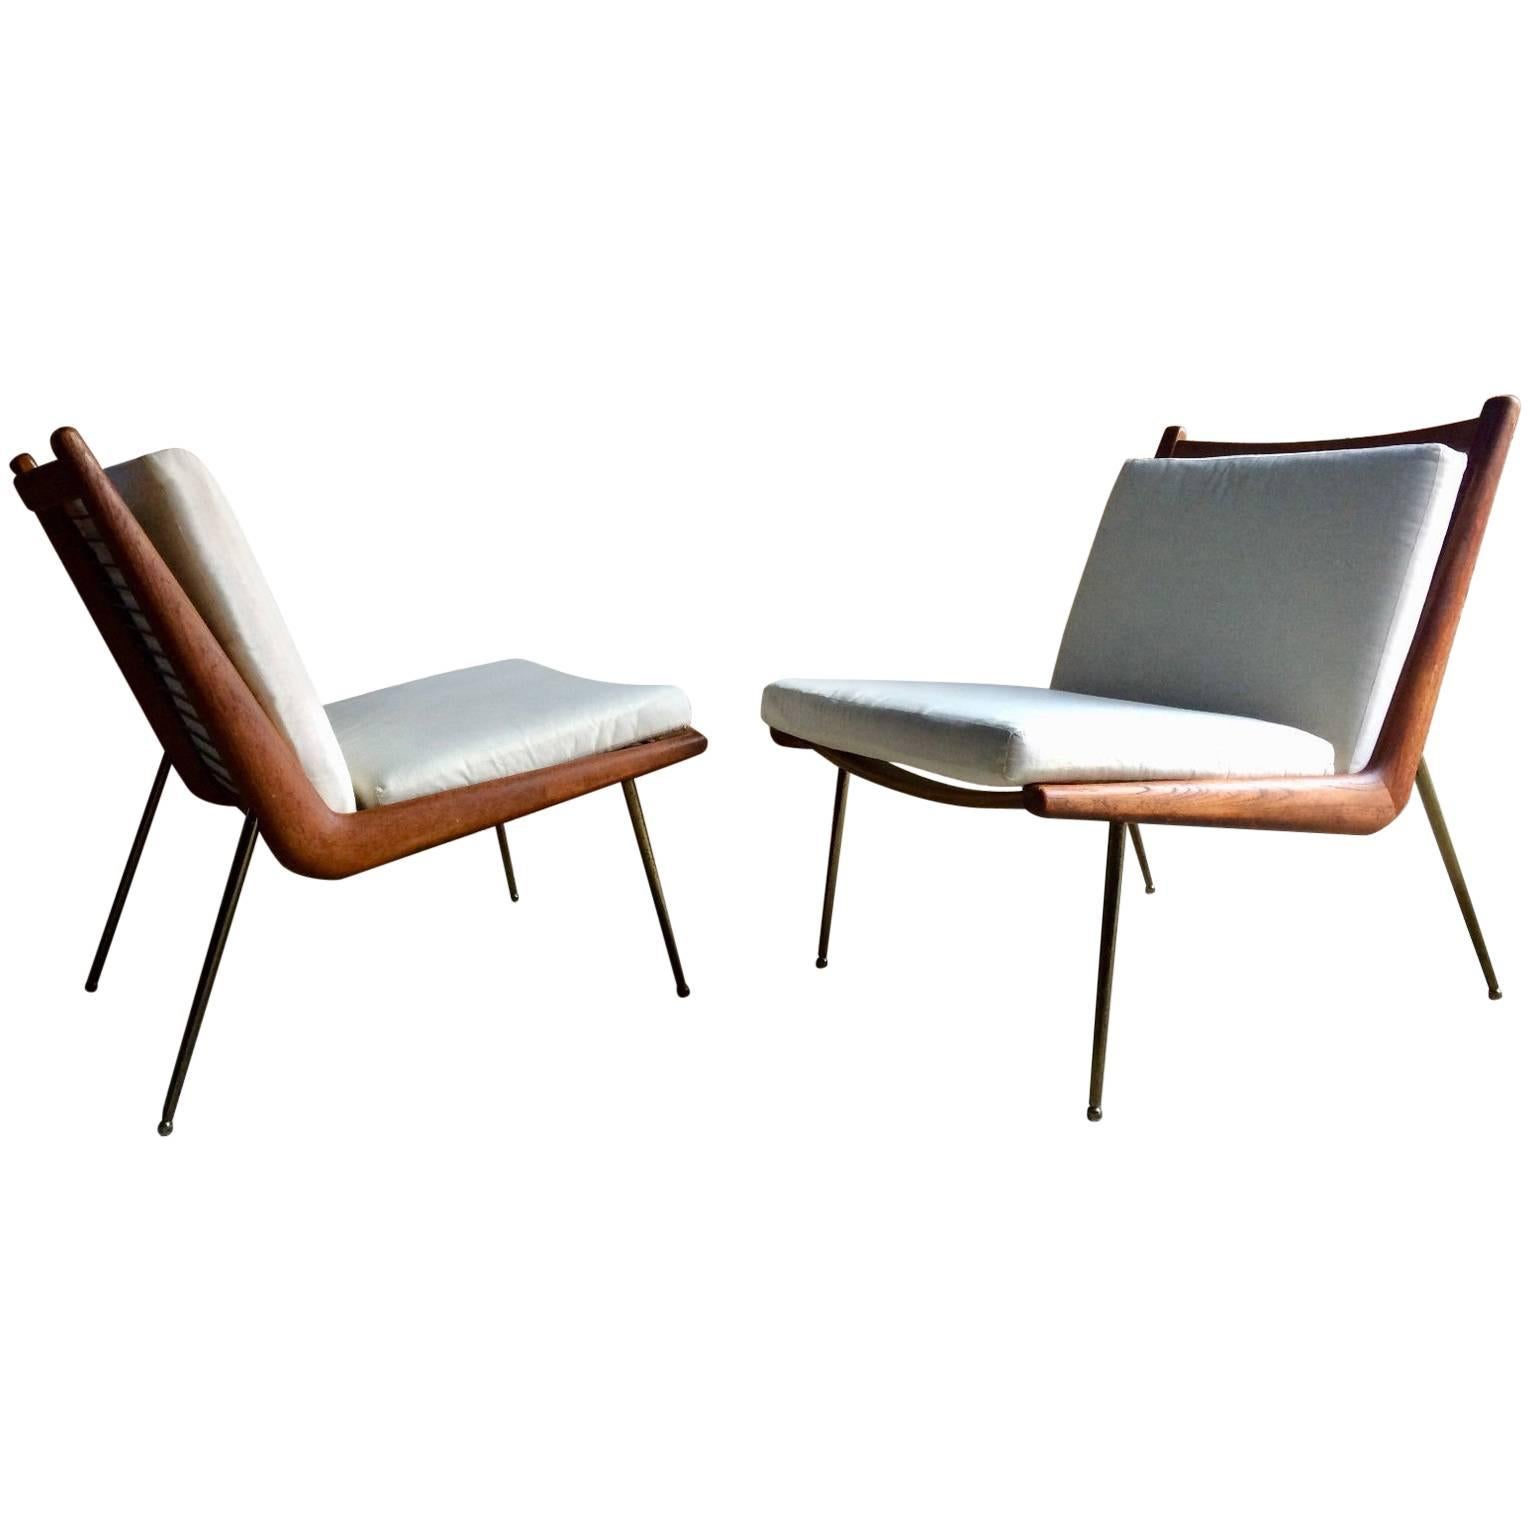 A pair of Boomerang chairs by Peter Hvidt and Orla Mølgaard Nielsen manufactured by France & Son, Denmark, the teak frames sit on brass-plated legs with sabots, the cushions are covered in a white calico material that will need to be cleaned or